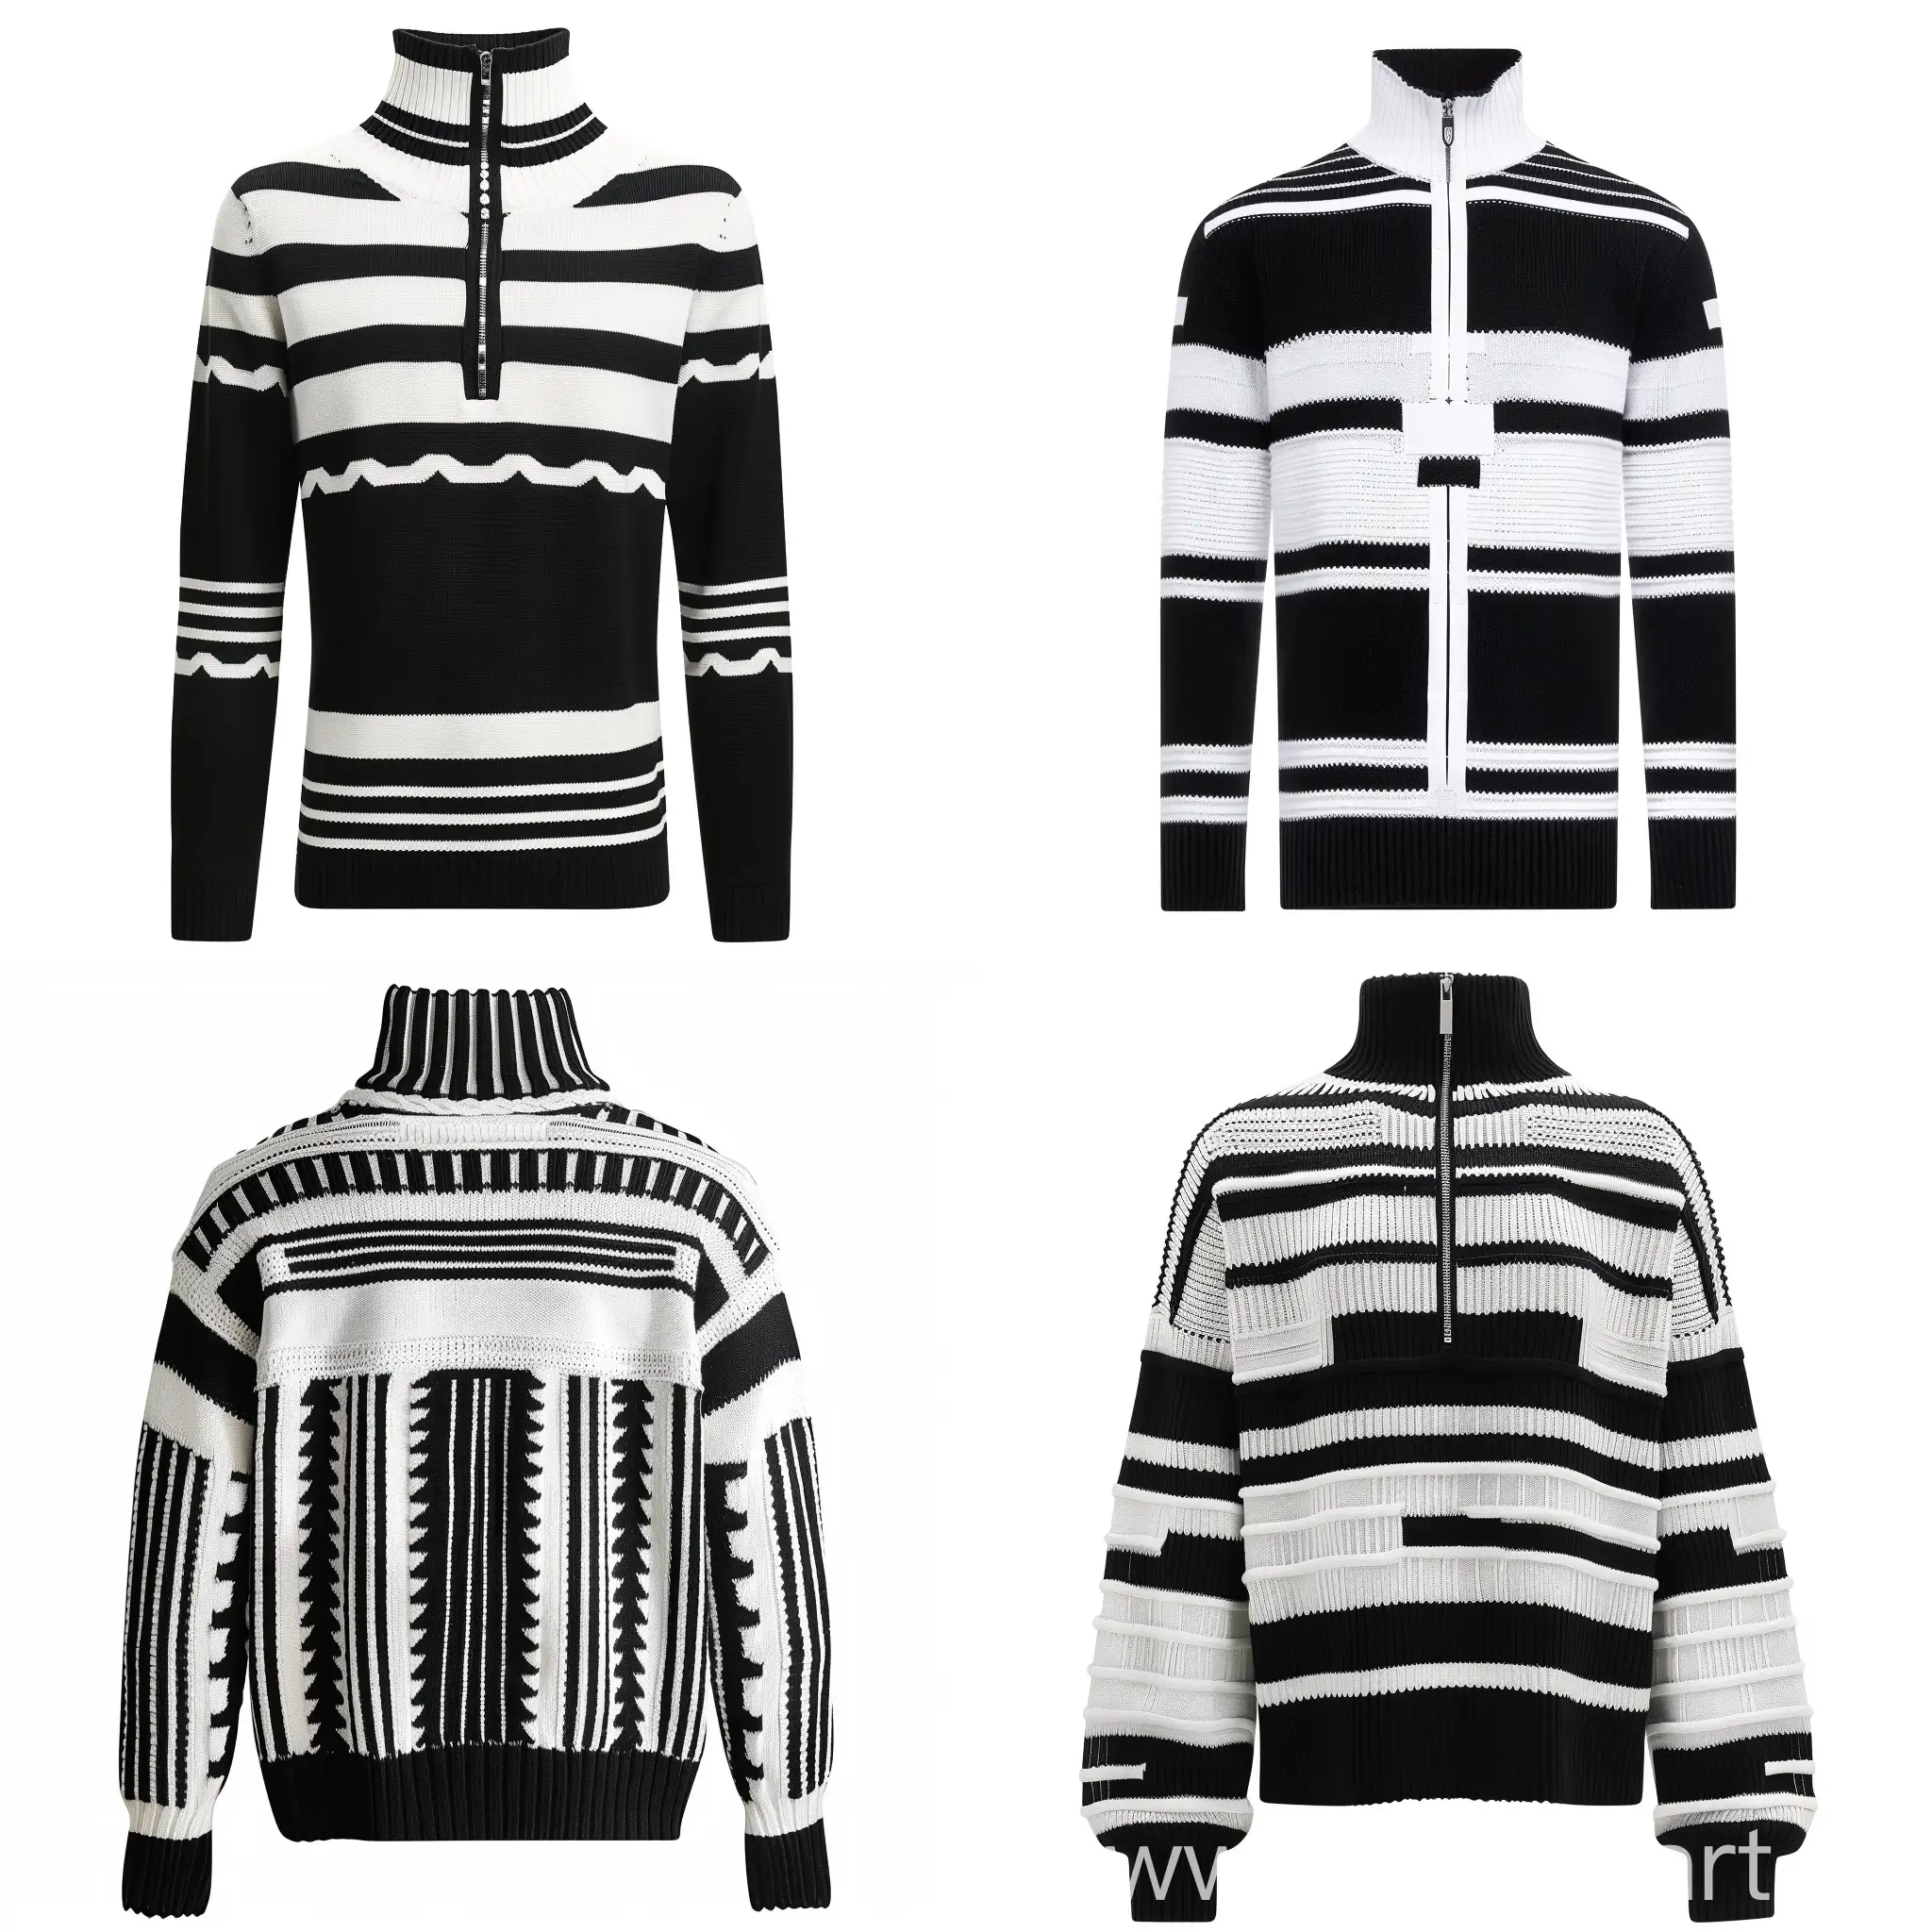 Stylish-Black-and-White-Striped-Sweater-with-Zipper-Detail